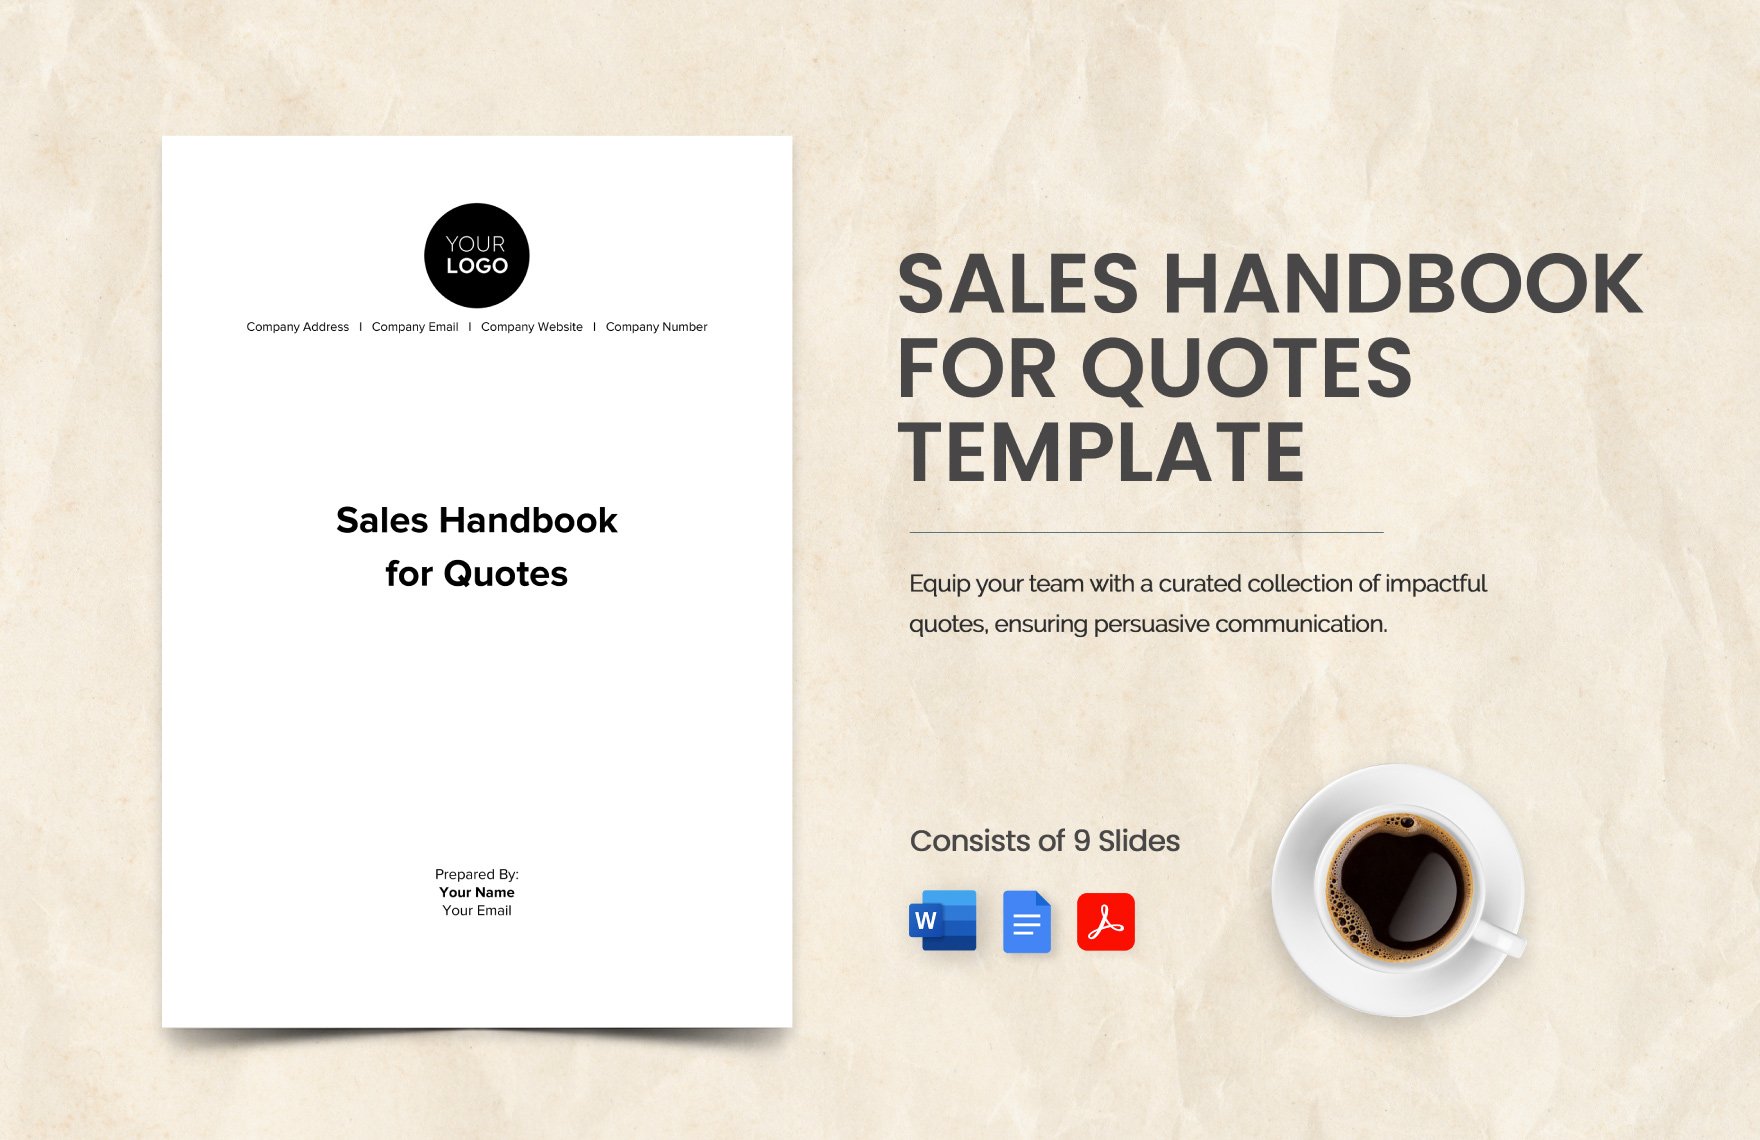 Sales Handbook for Quotes Template